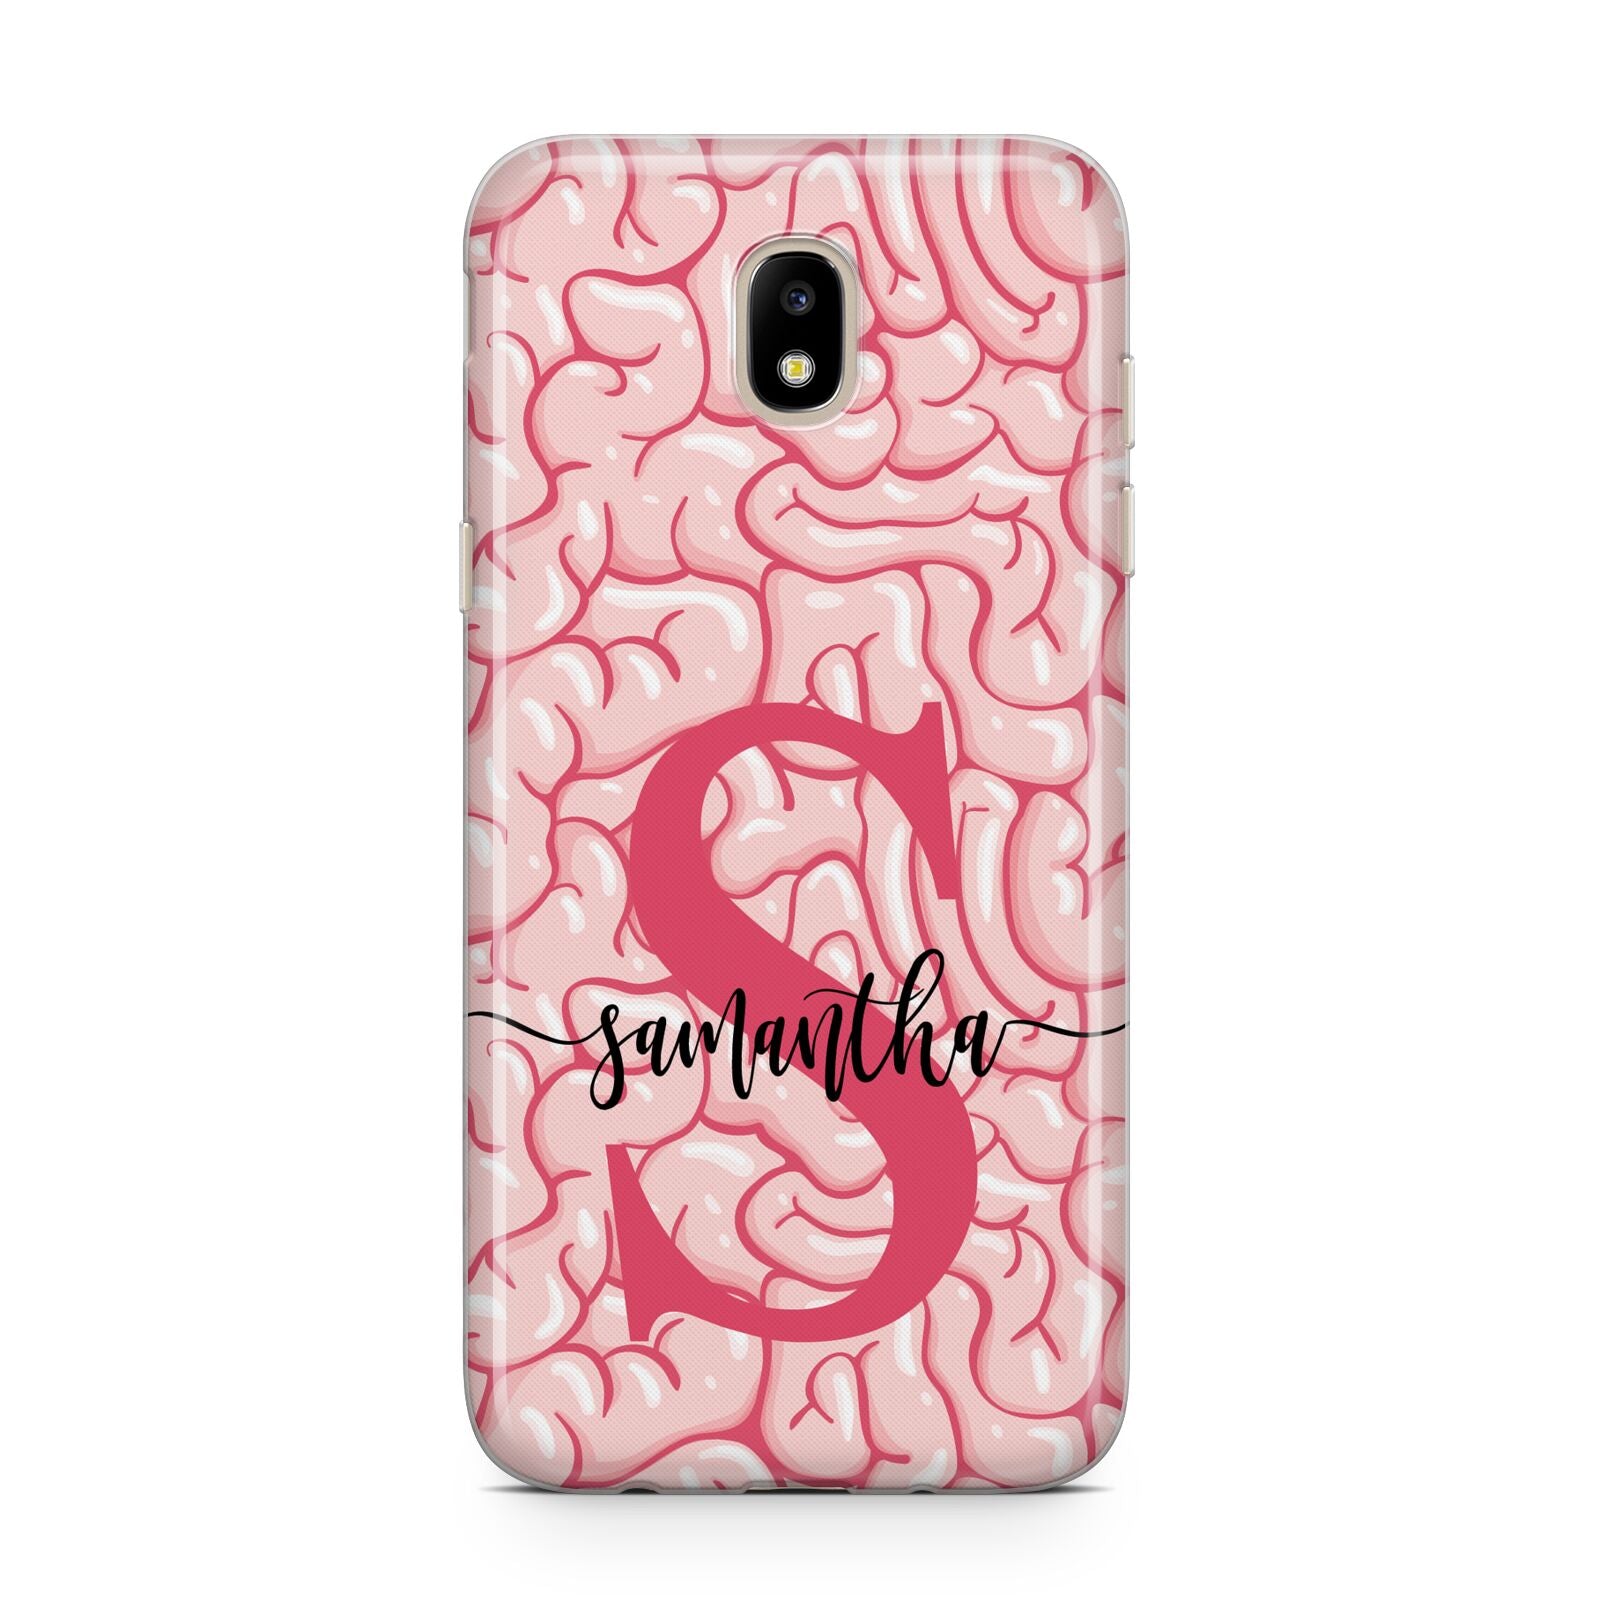 Brain Background with Monogram and Text Samsung J5 2017 Case